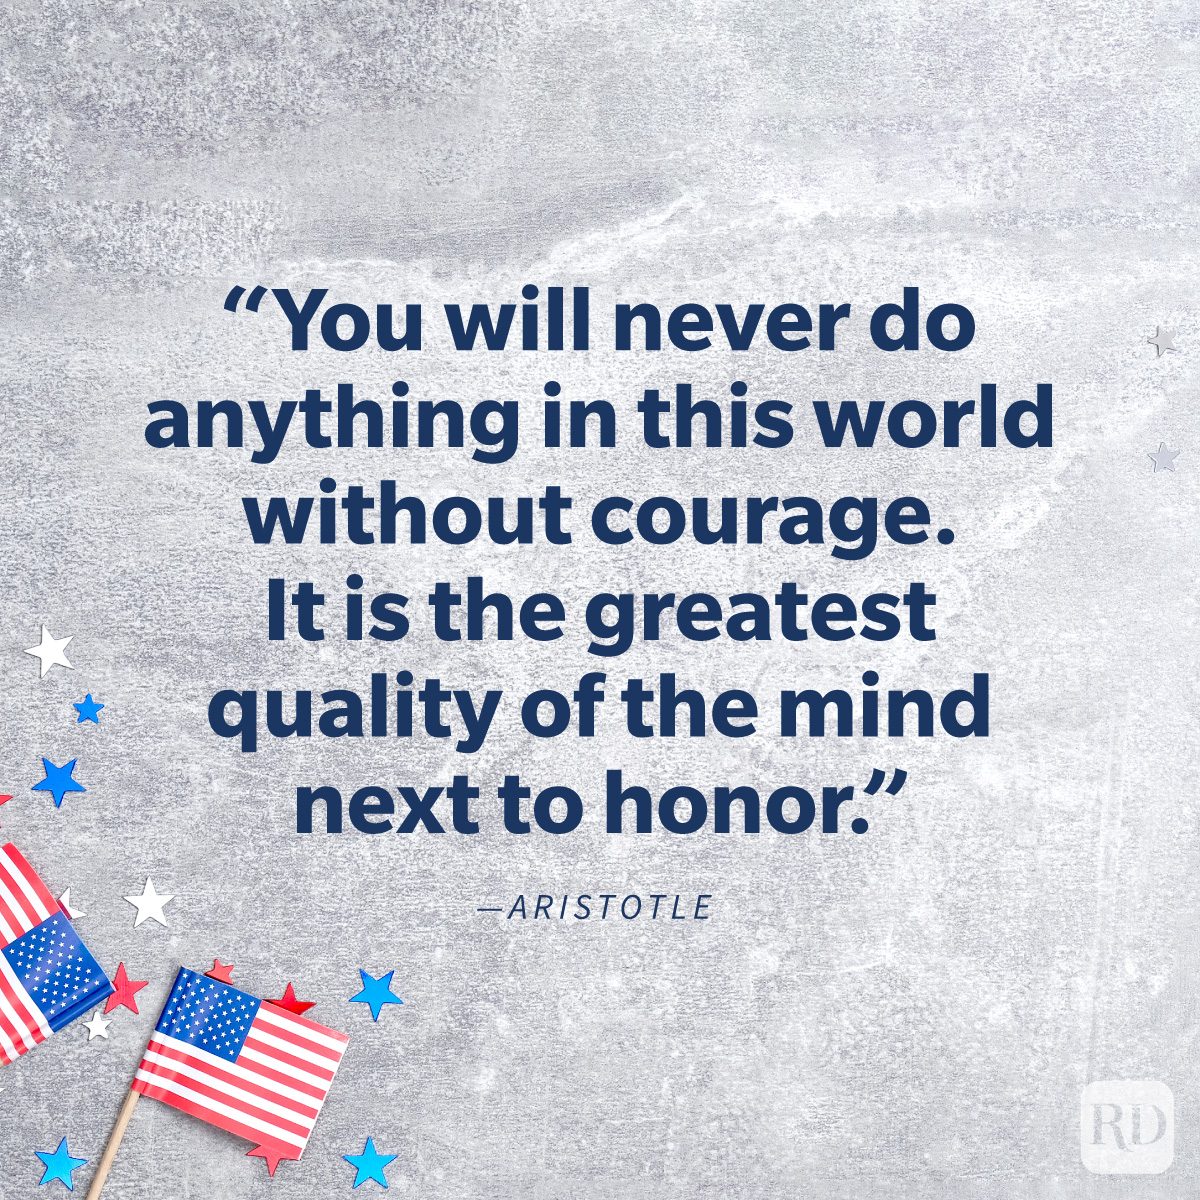 Memorial Day Quotes To Share In Honor And Remembrance “You will never do anything in this world without courage. It is the greatest quality of the mind next to honor.” by Aristotle on background of flags and confetti stars on concrete stone